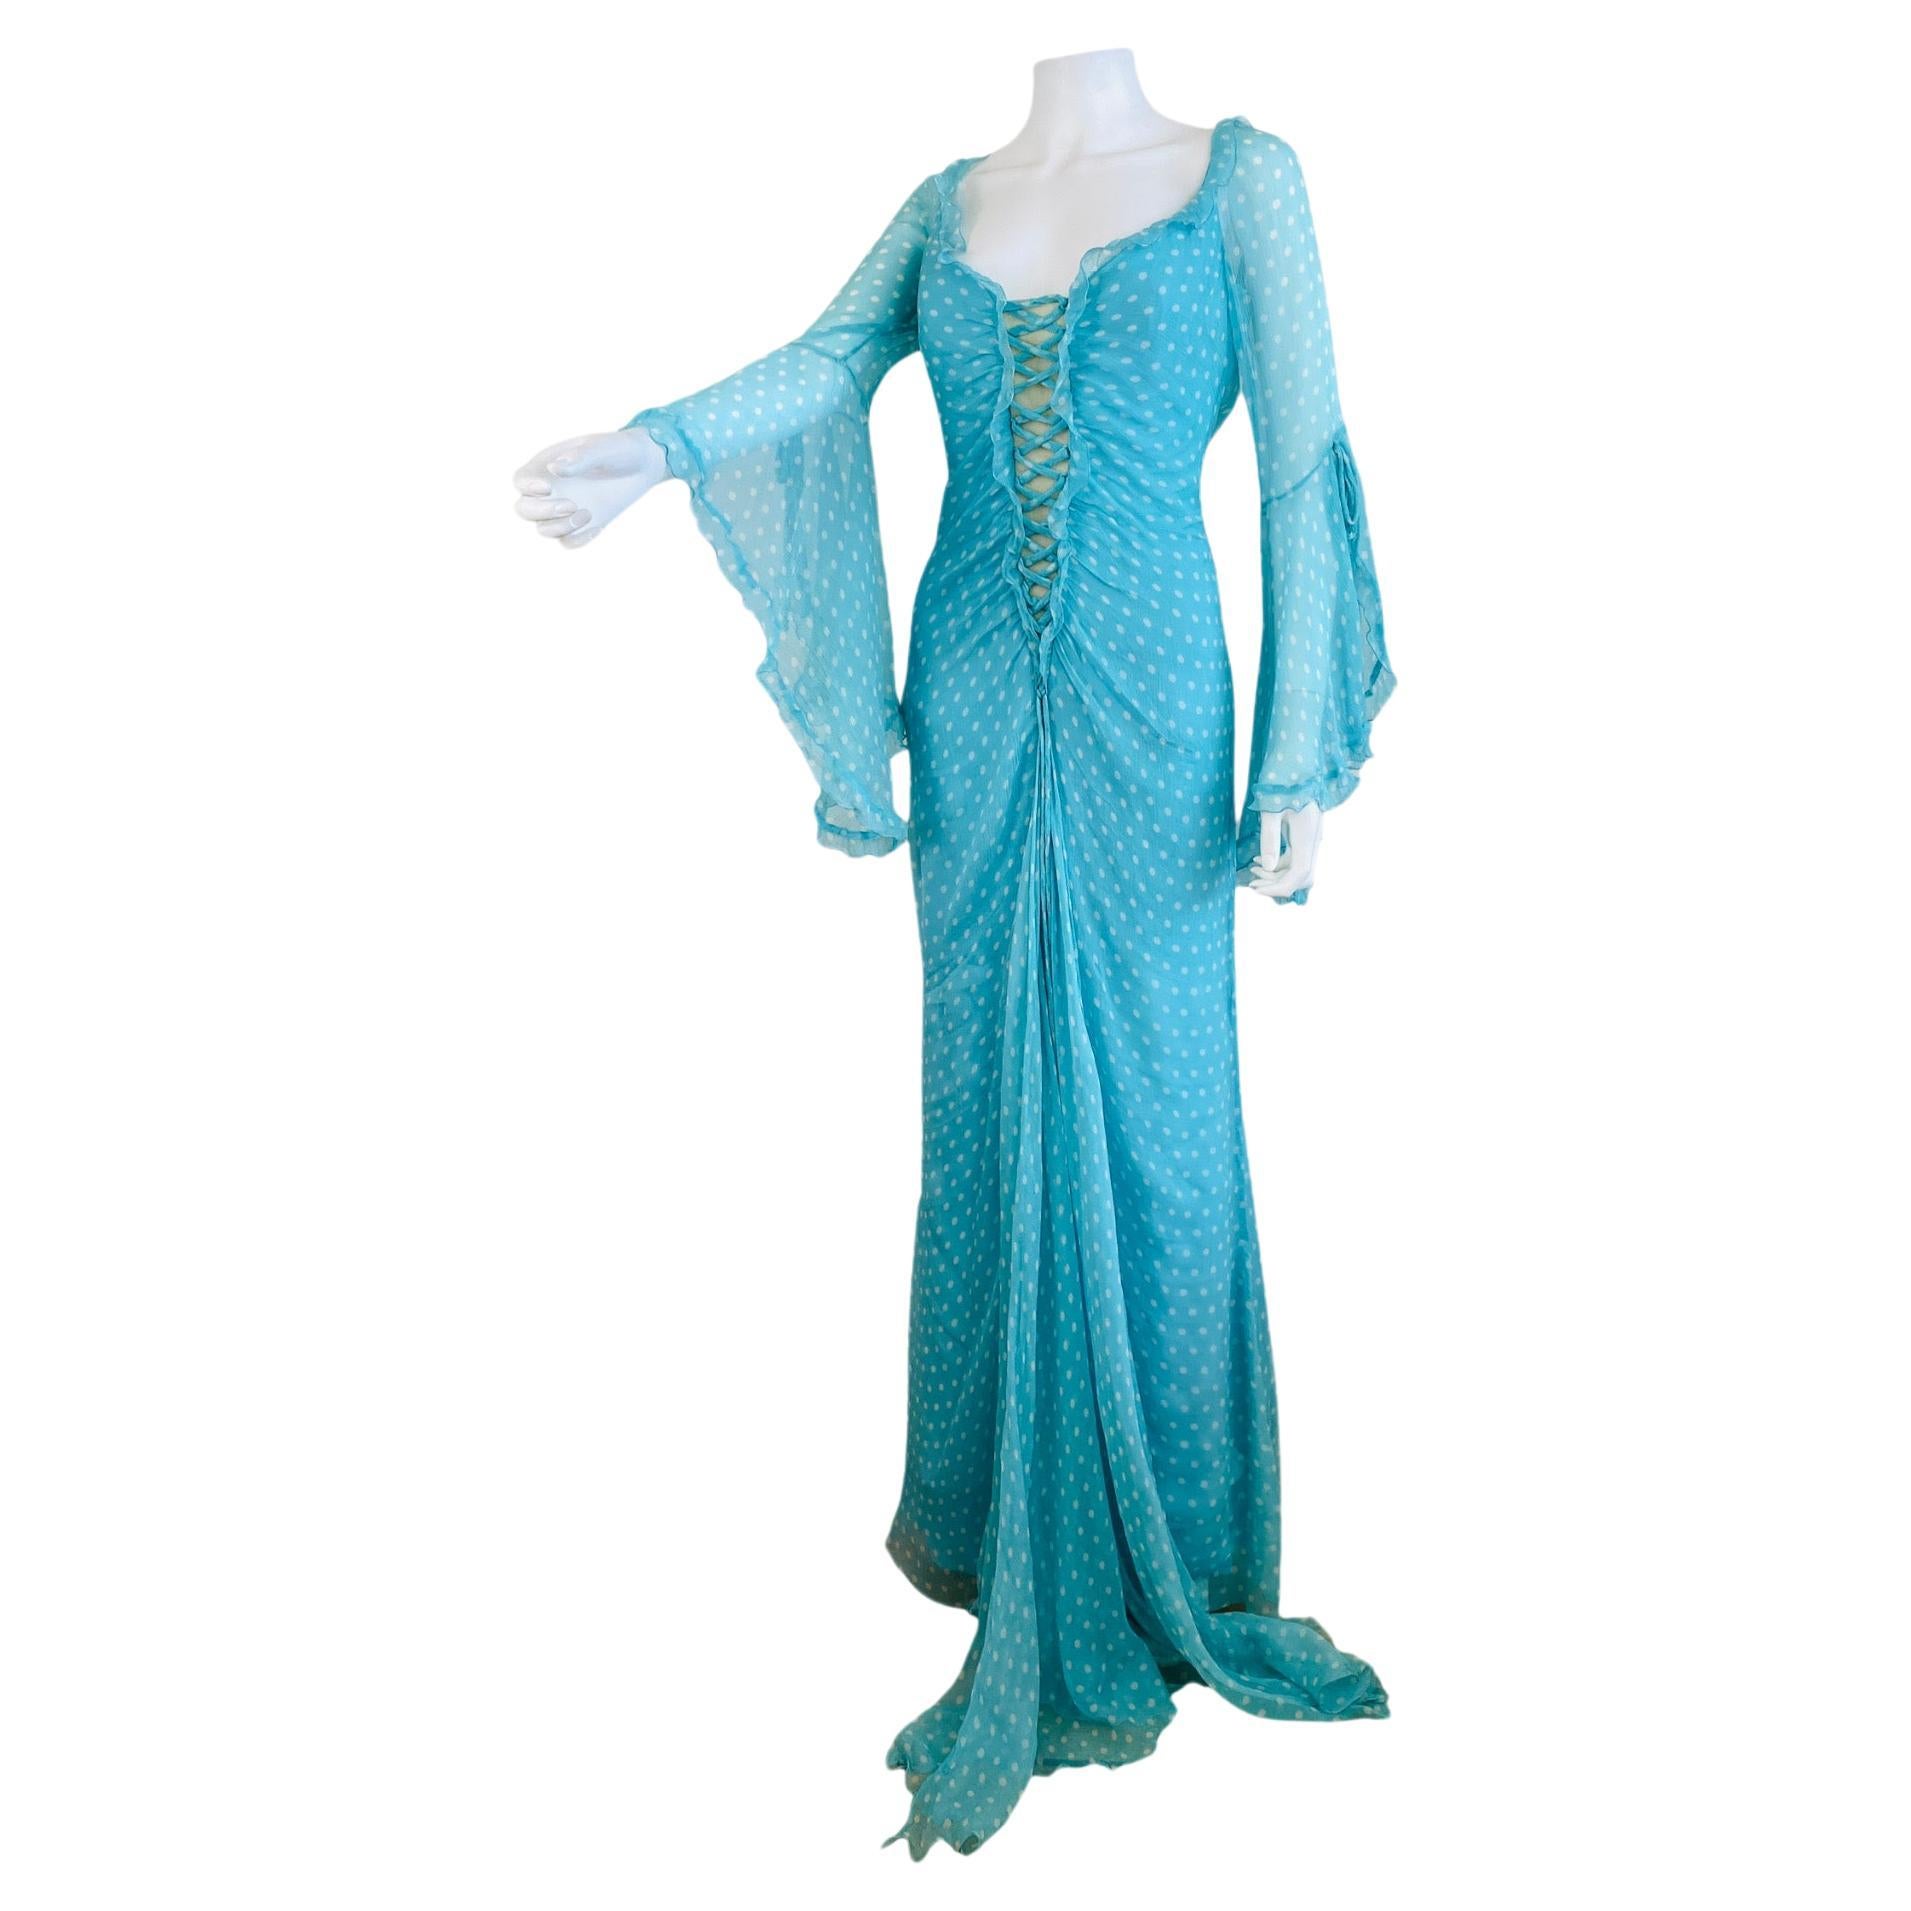 Vintage Bellville Sassoon Turquoise Blue Polka Dot Silk Gown Dress For Sale